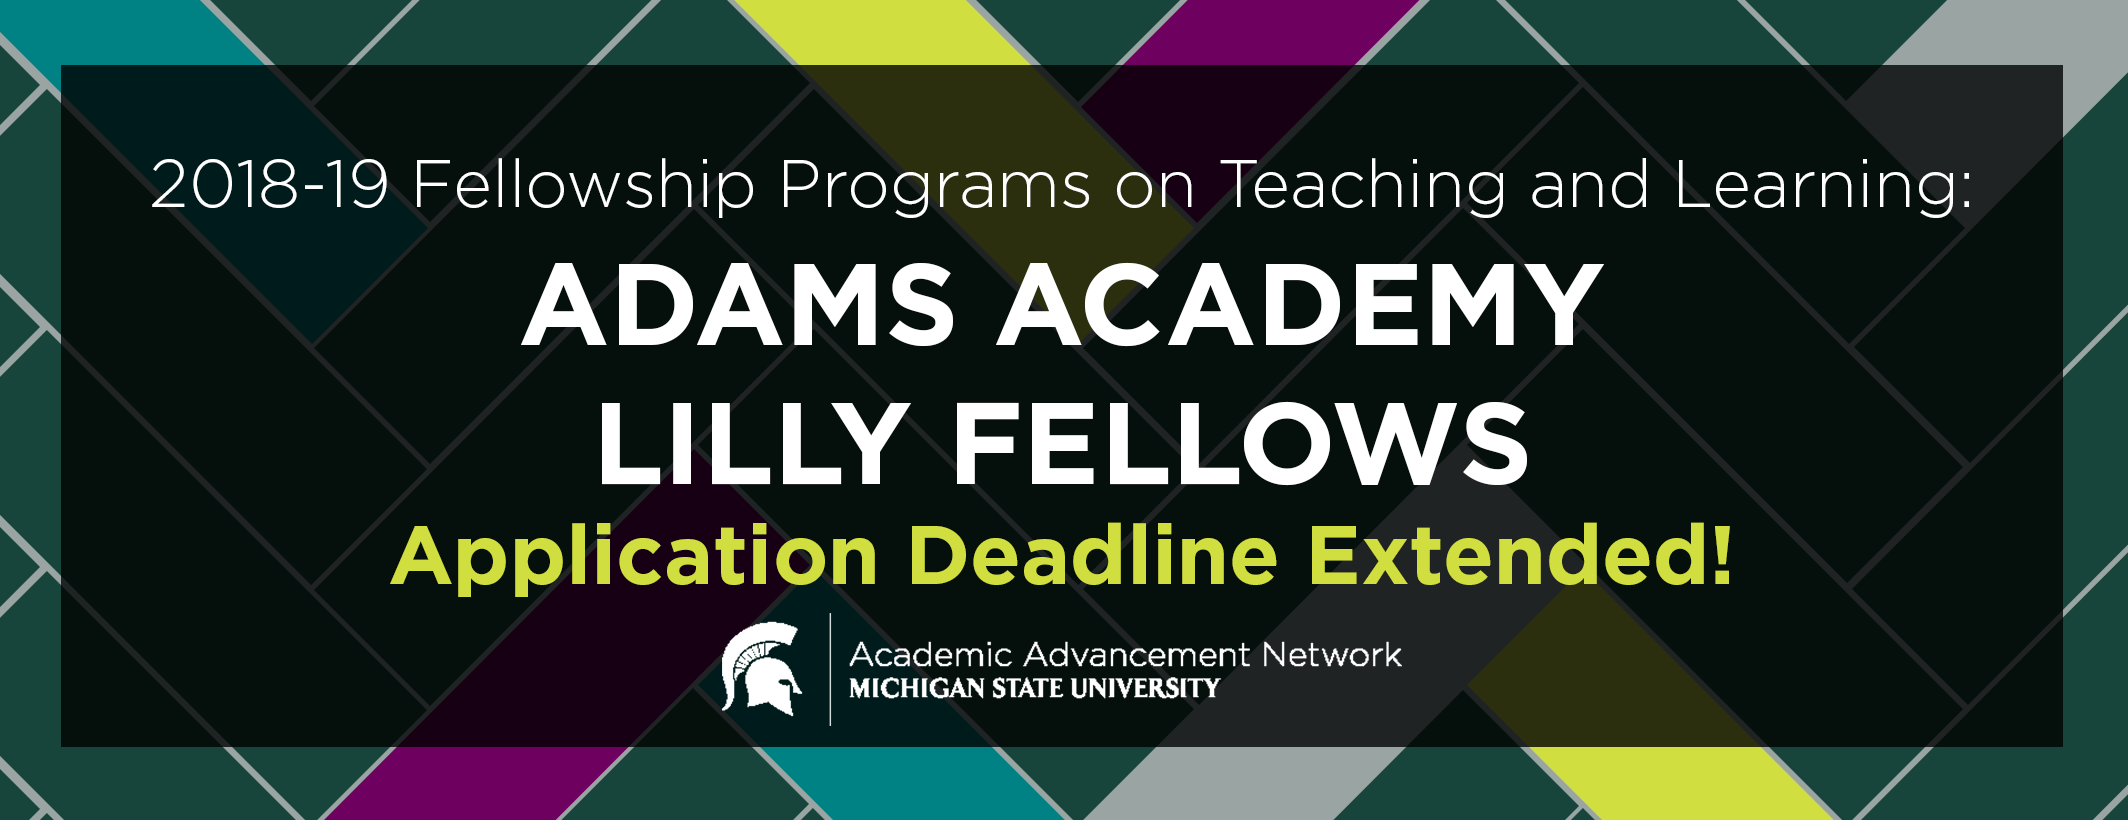 Fellowship Programs on Teaching and Learning: Adams Academy and Lilly Fellows Application Deadline Extended